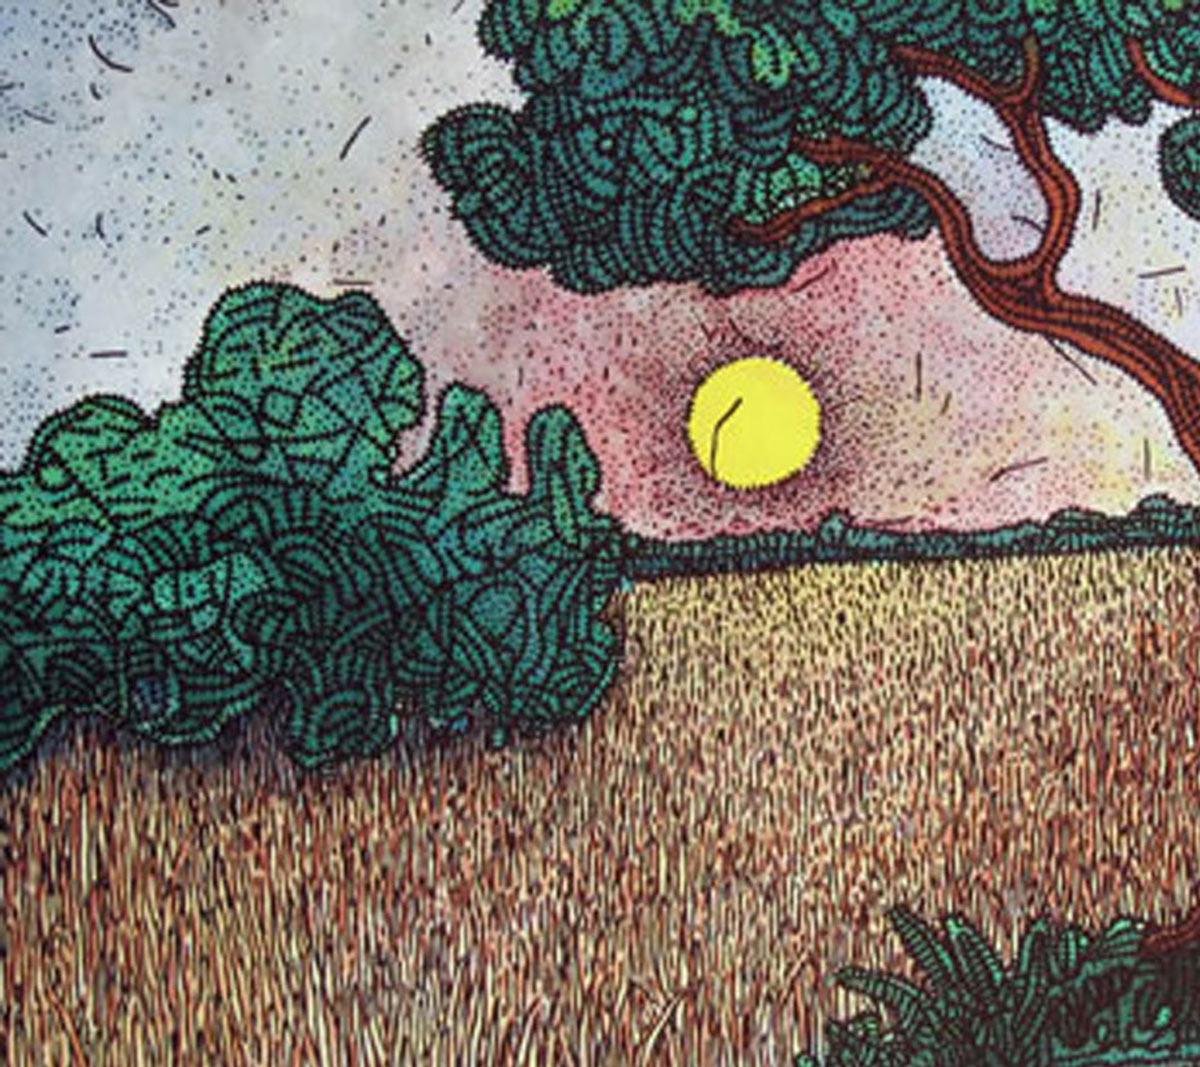 Landscape, Painting, Mixed Media on canvas, Green, Brown, Yellow, Red 